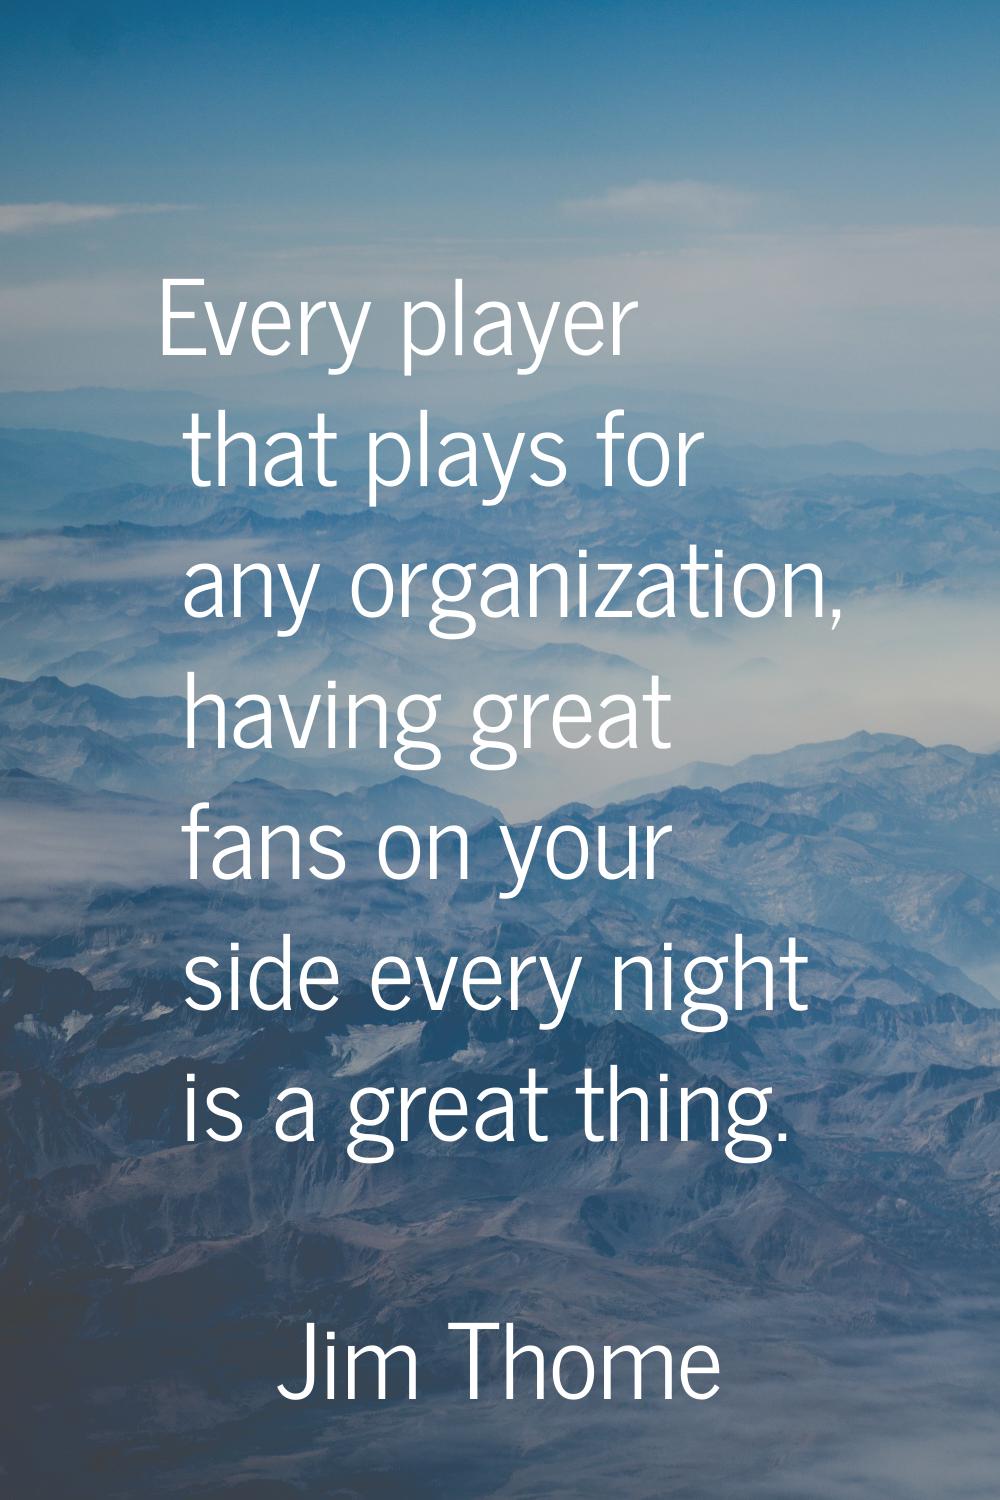 Every player that plays for any organization, having great fans on your side every night is a great